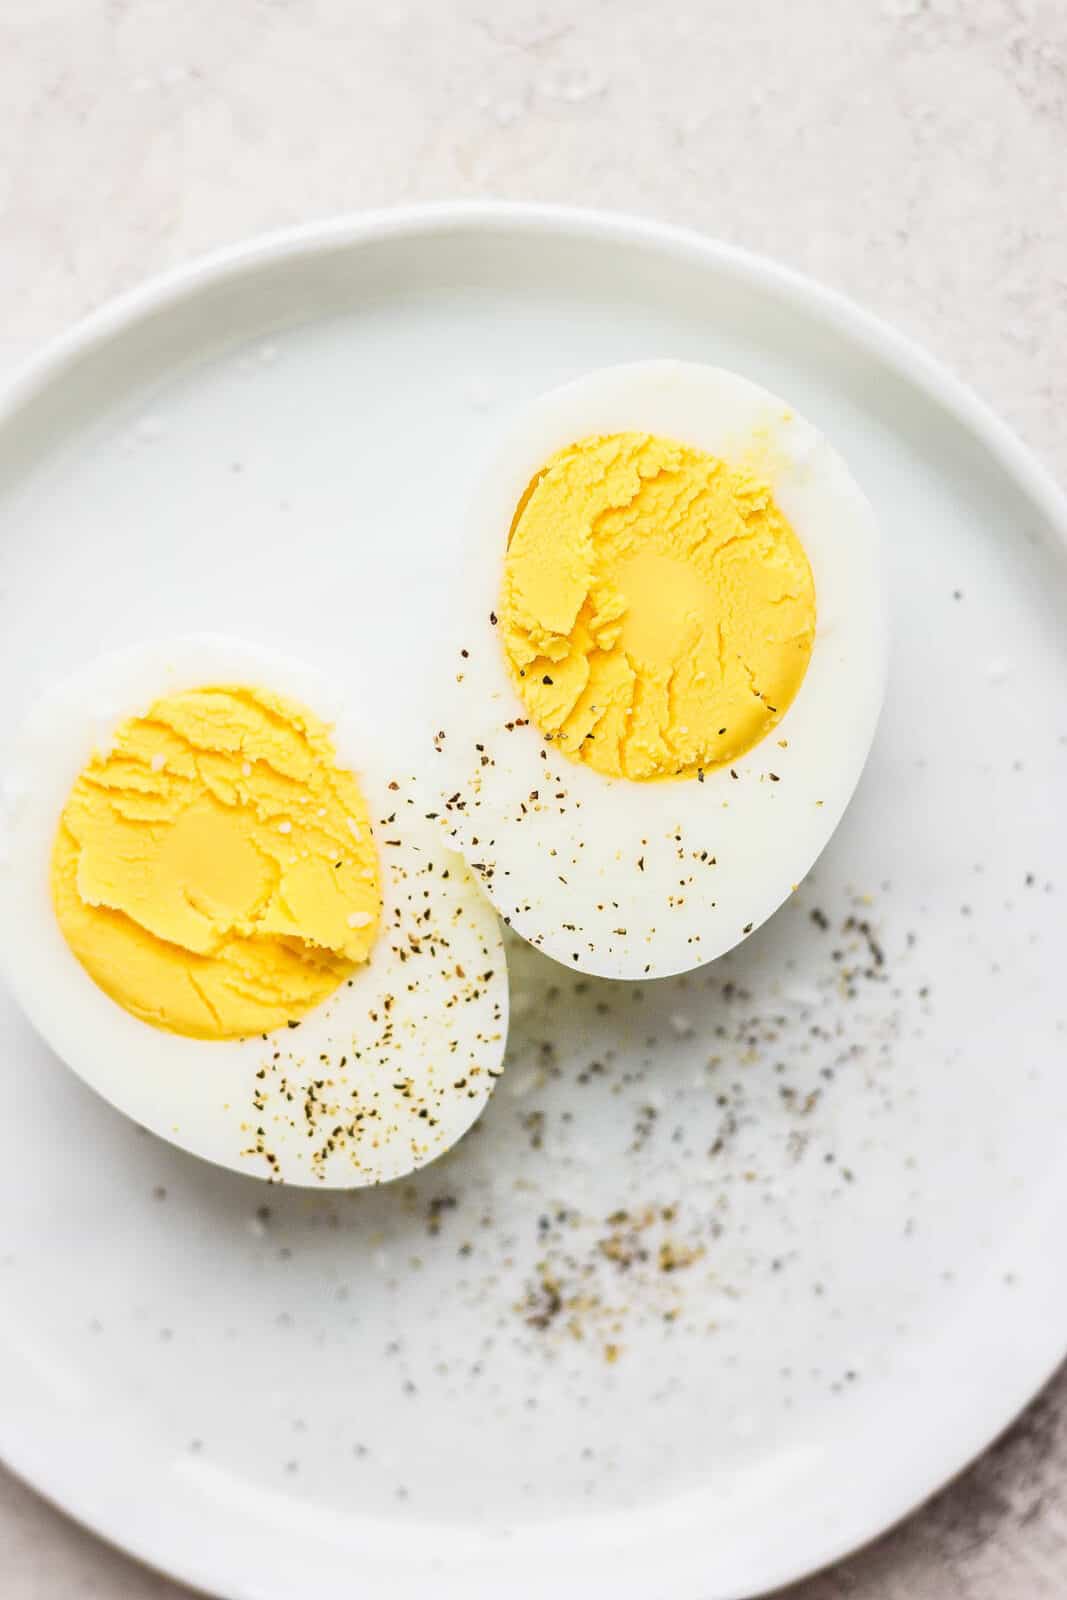 Hard boiled eggs cut in half on a plate with salt and pepper.